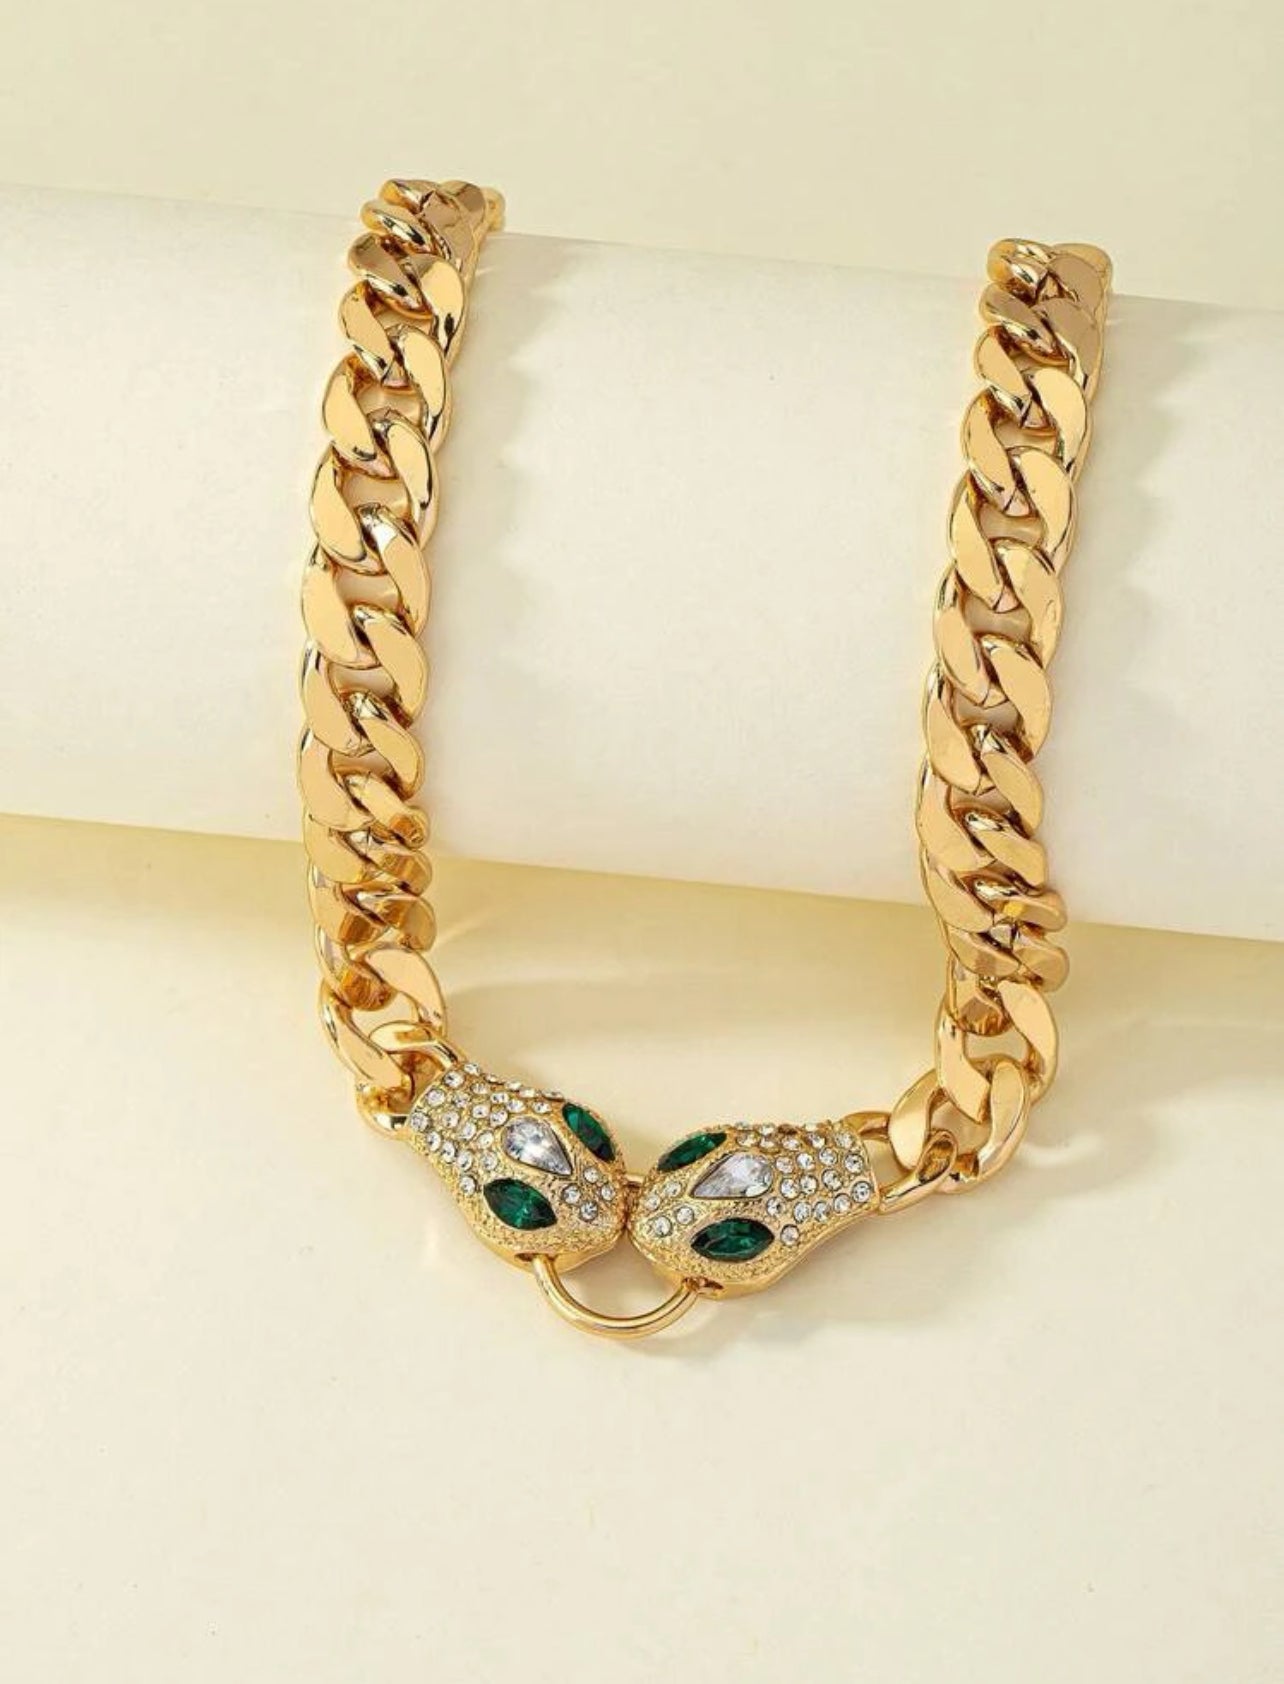 Unique Double Head Snake Design Necklace Alloy Jewelry Embellished With Rhinestones